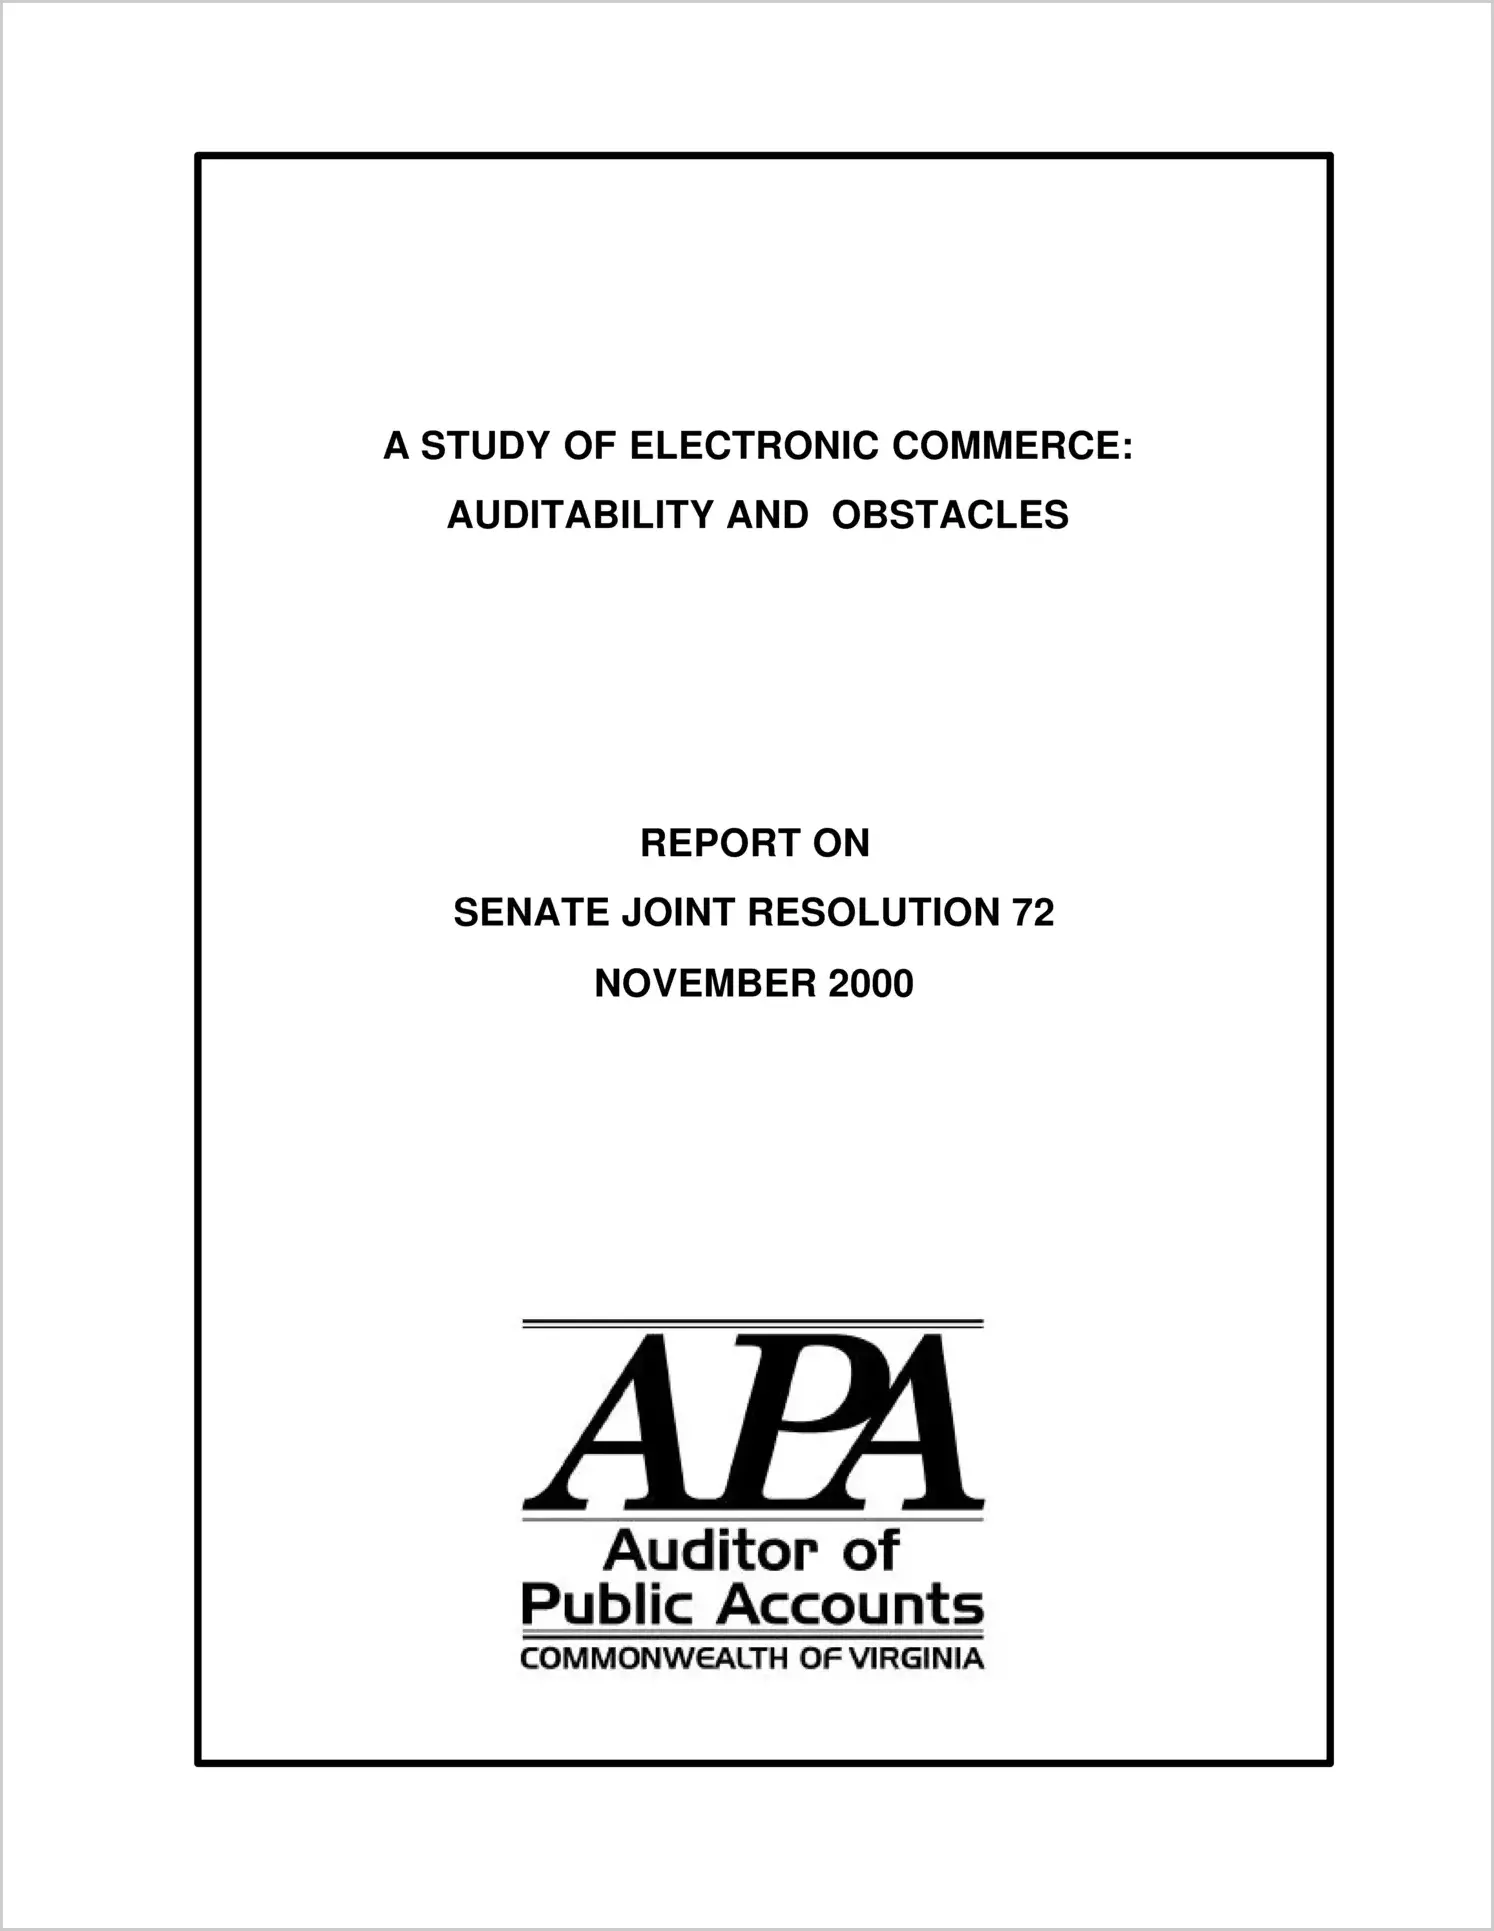 Special ReportA Study of Electronic Commerce: Auditability and Obstacles(Report Date: 11/6/2000)